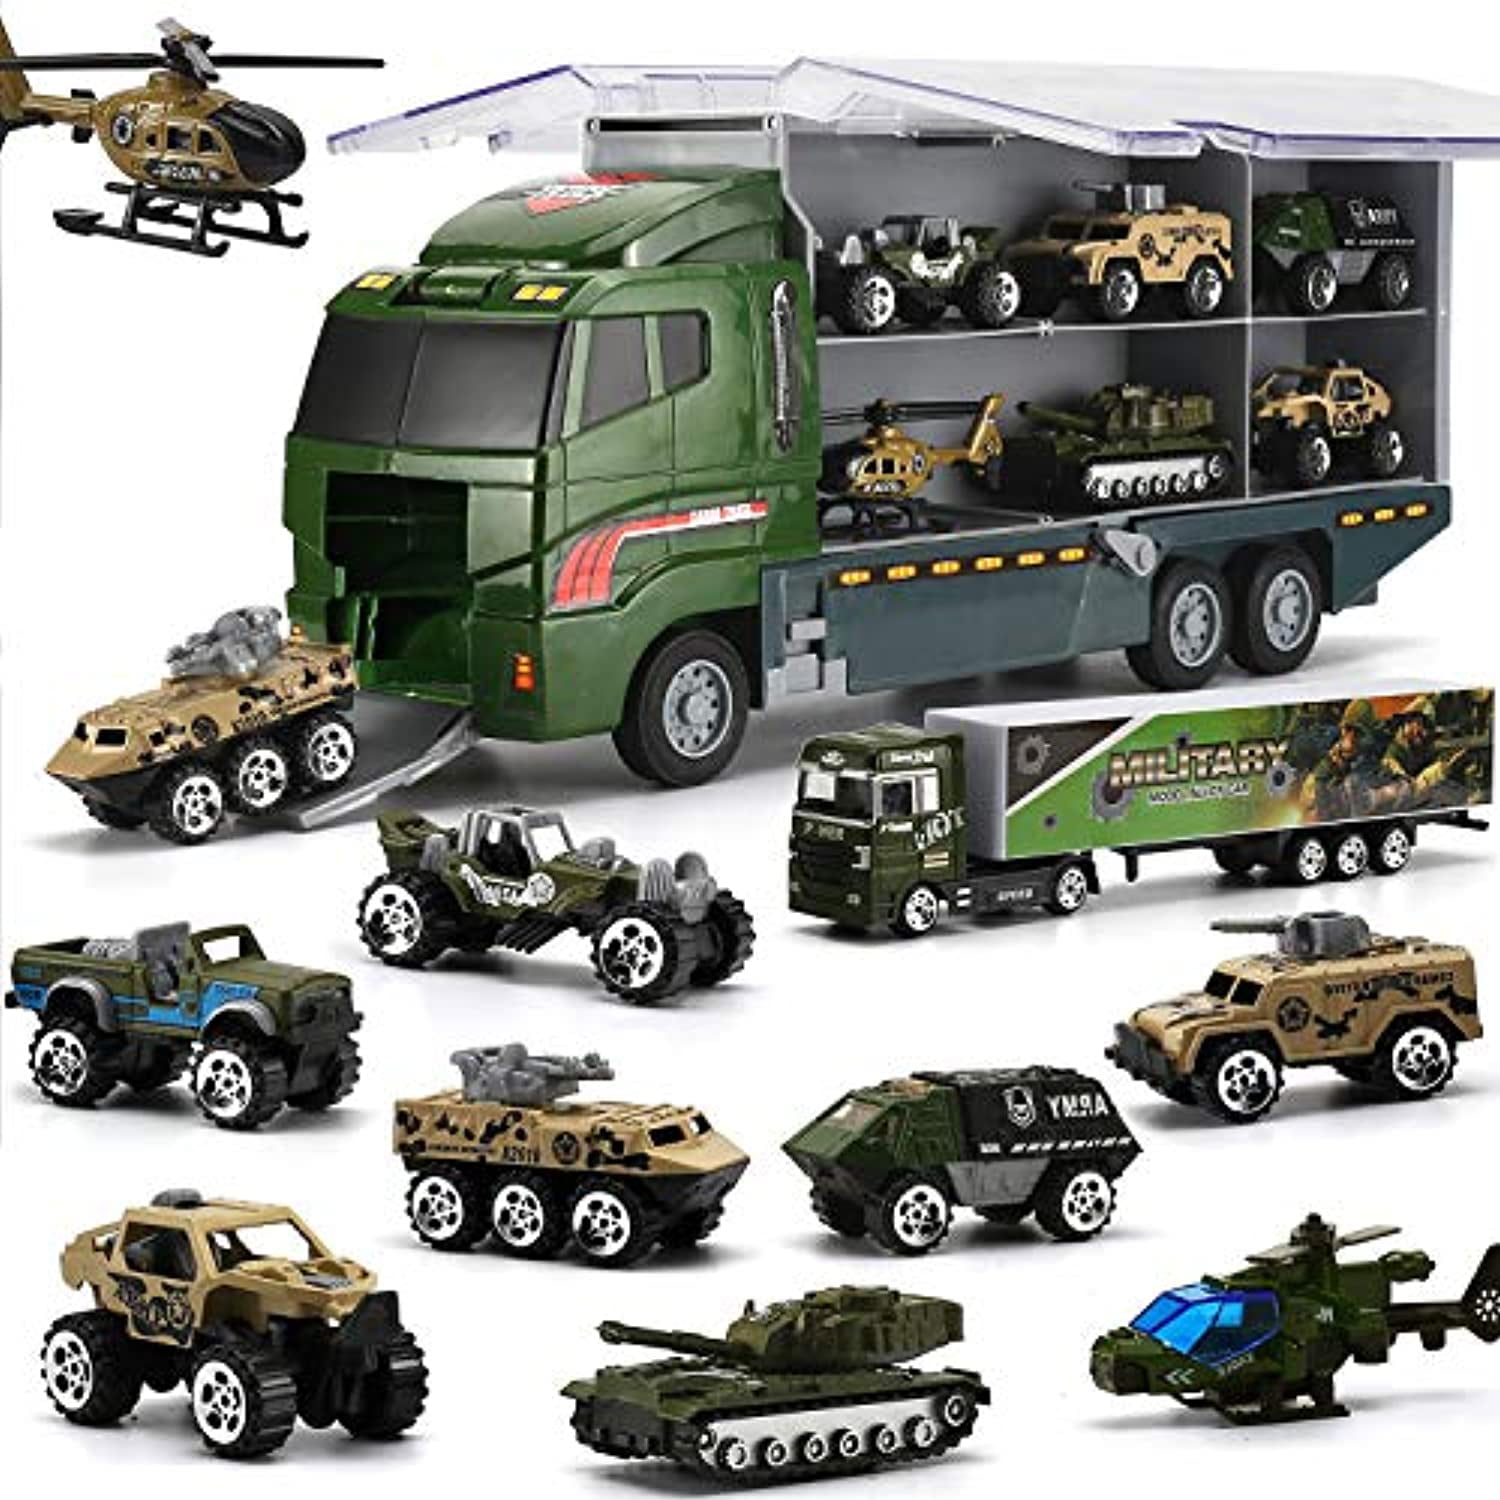 Joy-Fun Toys for 2-5 Year Old Boys Die-cast Army Toy Vehicles Toy Helicopter, 